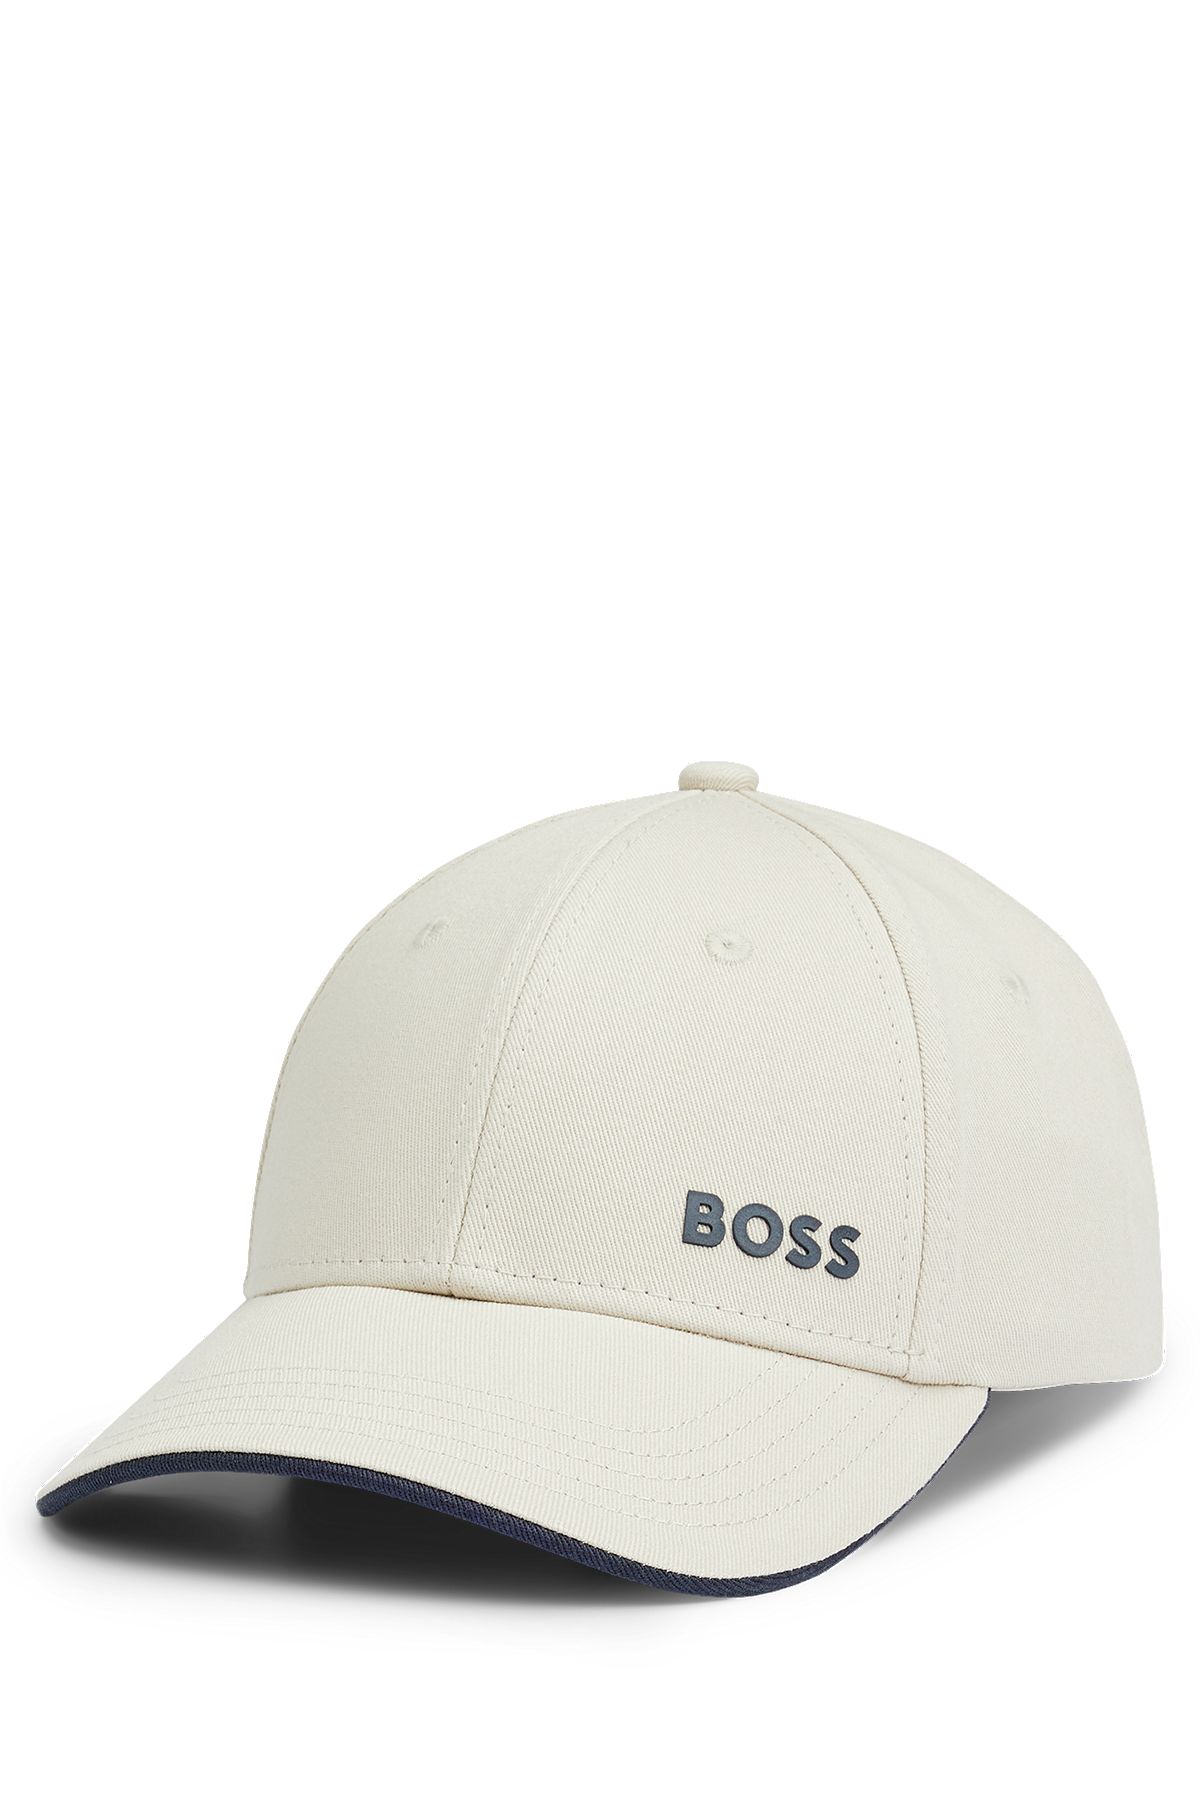 in Beige and HUGO | BOSS Gloves by Hats